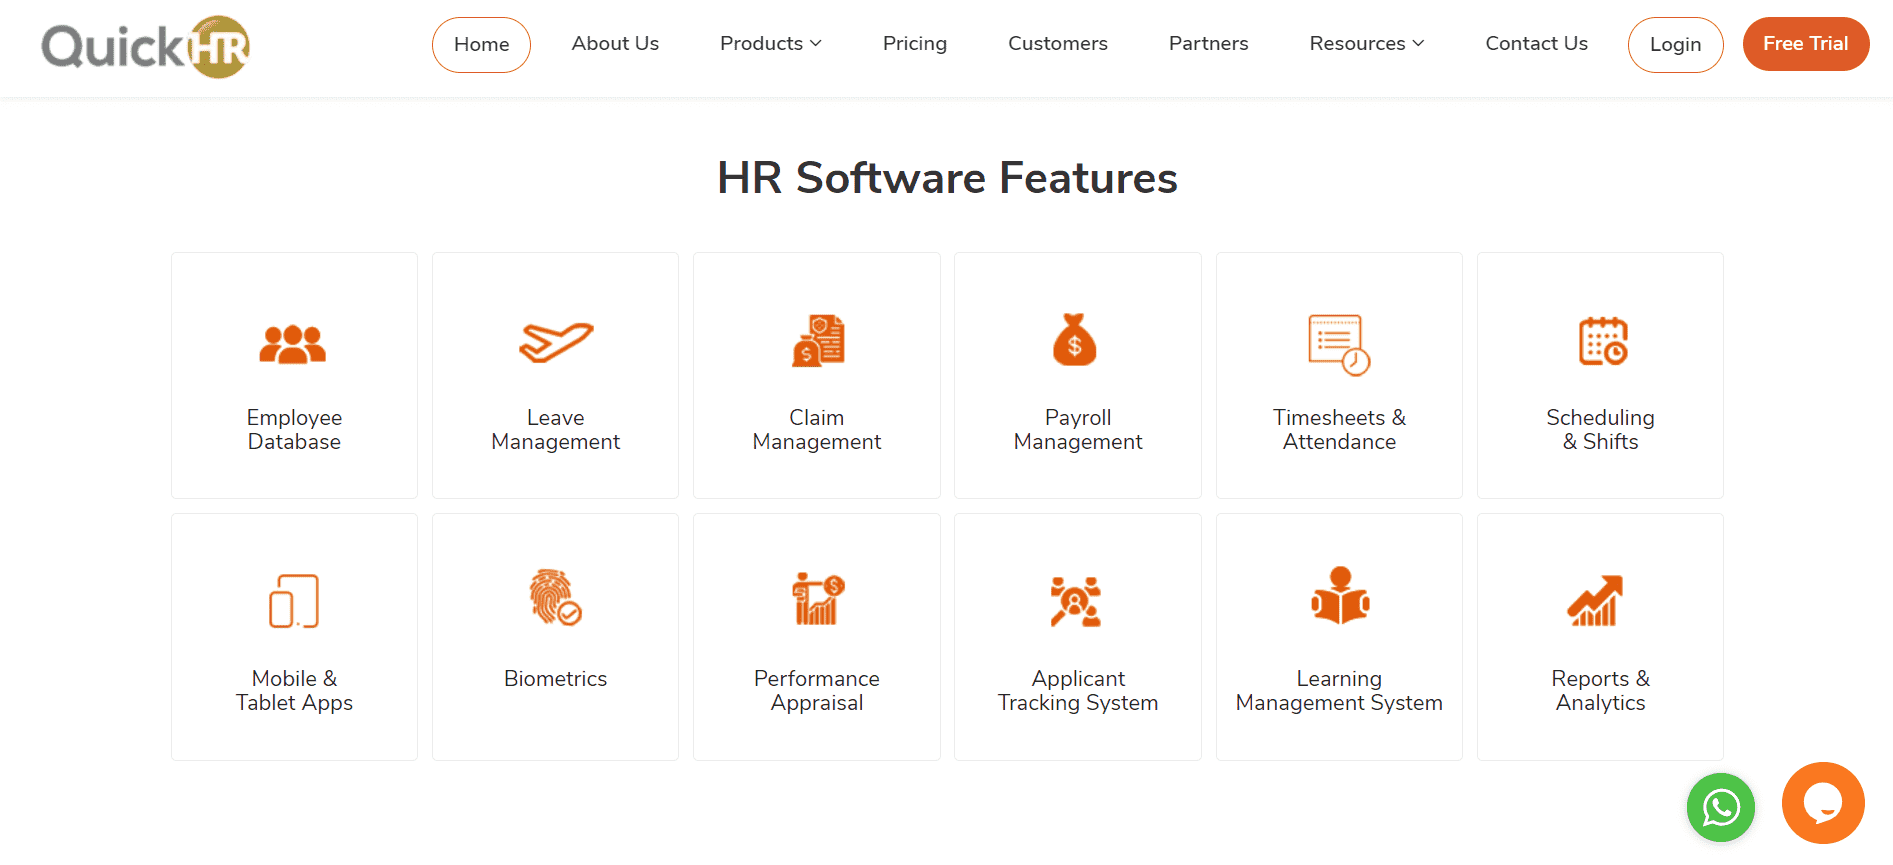 Homepage image of QuickHR mentioning about various HR software features they have.